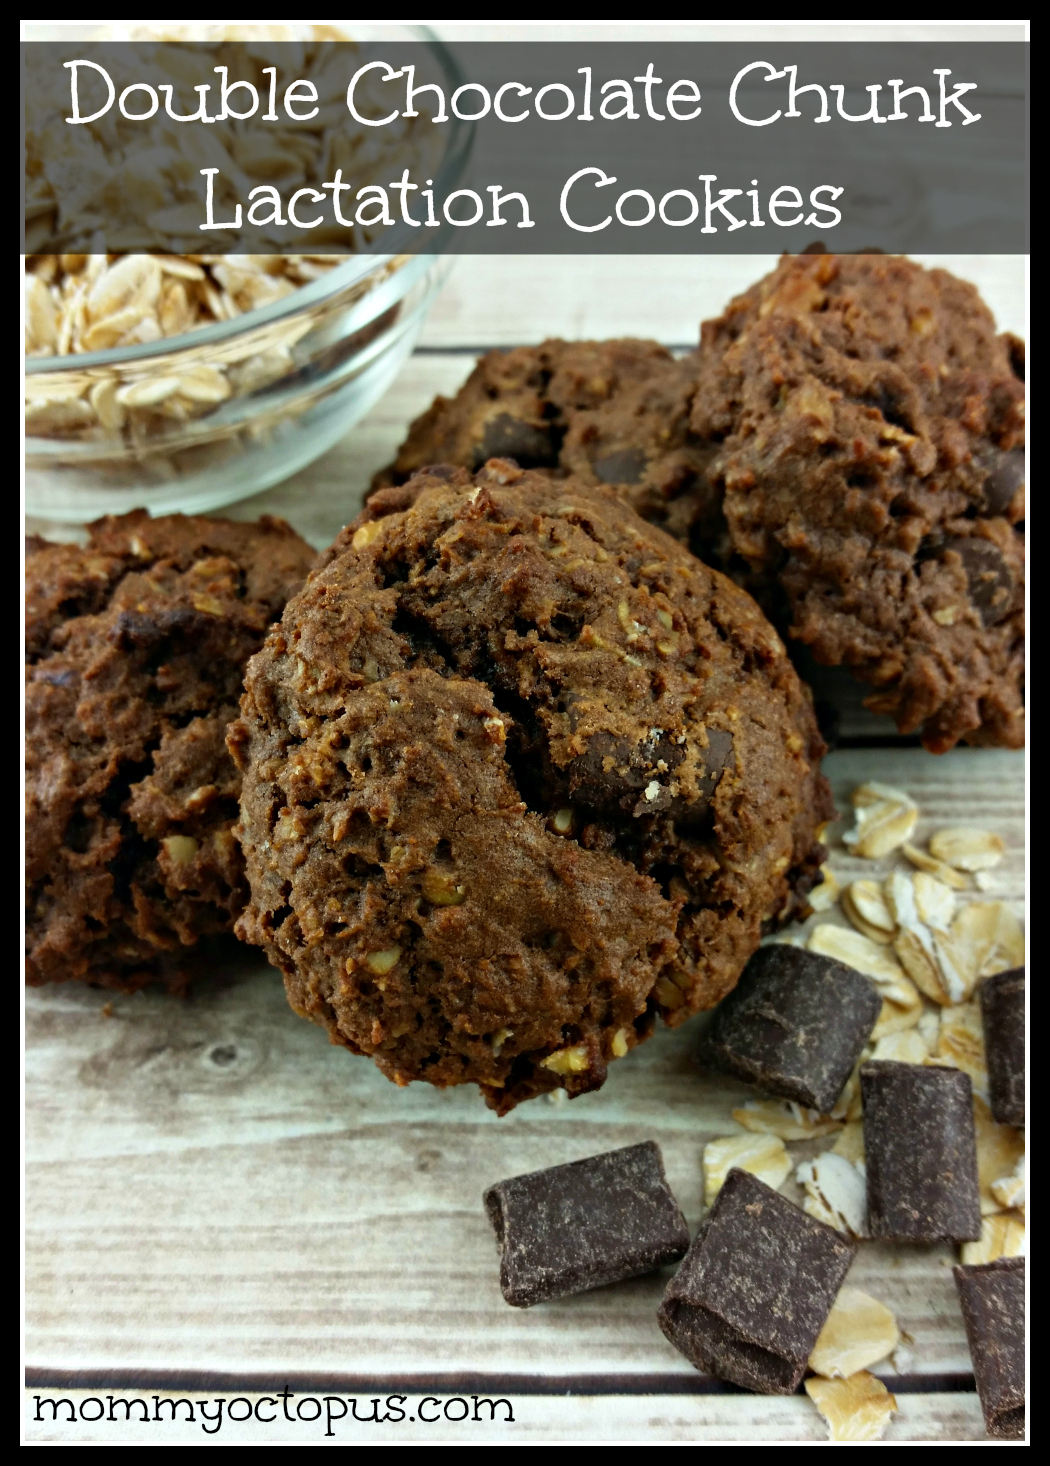 Double Chocolate Chunk Lactation Cookies